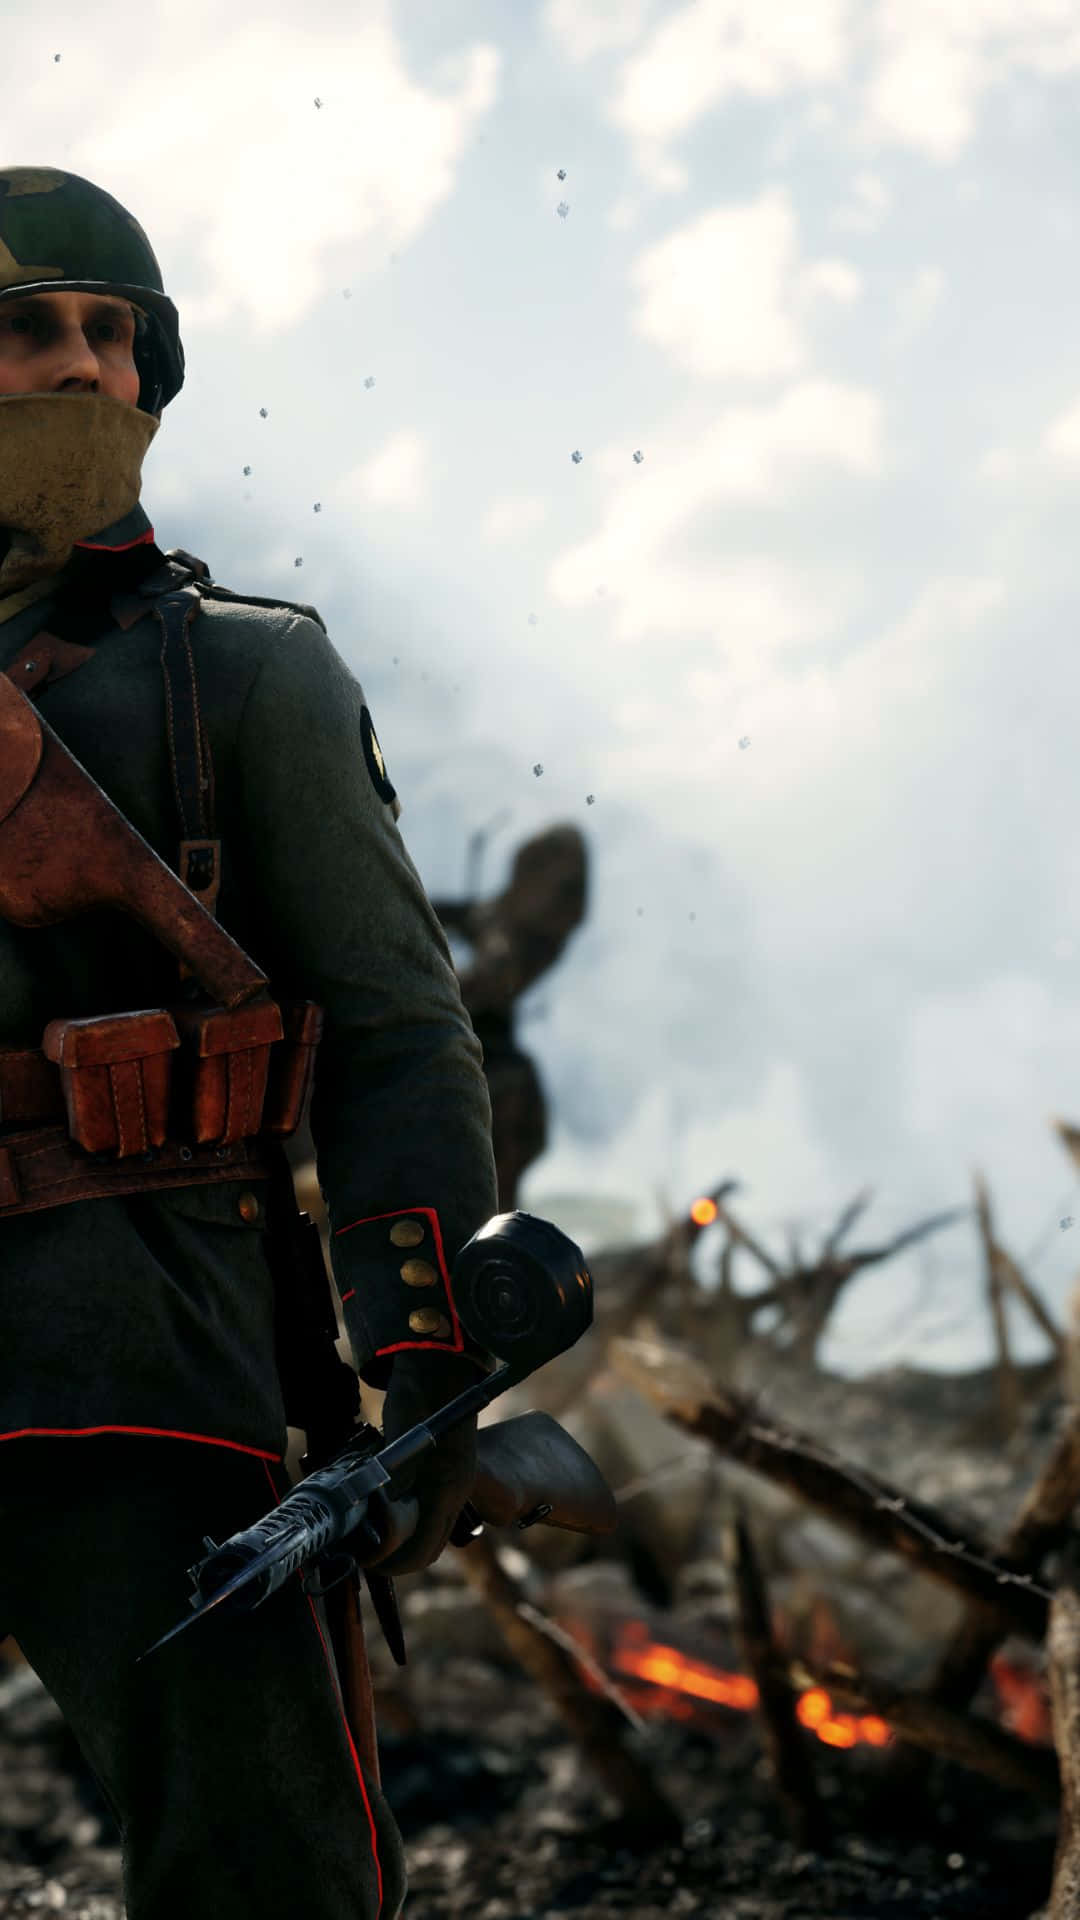 "Immerse in the Battlefield - Android Battlefield 1 Background"